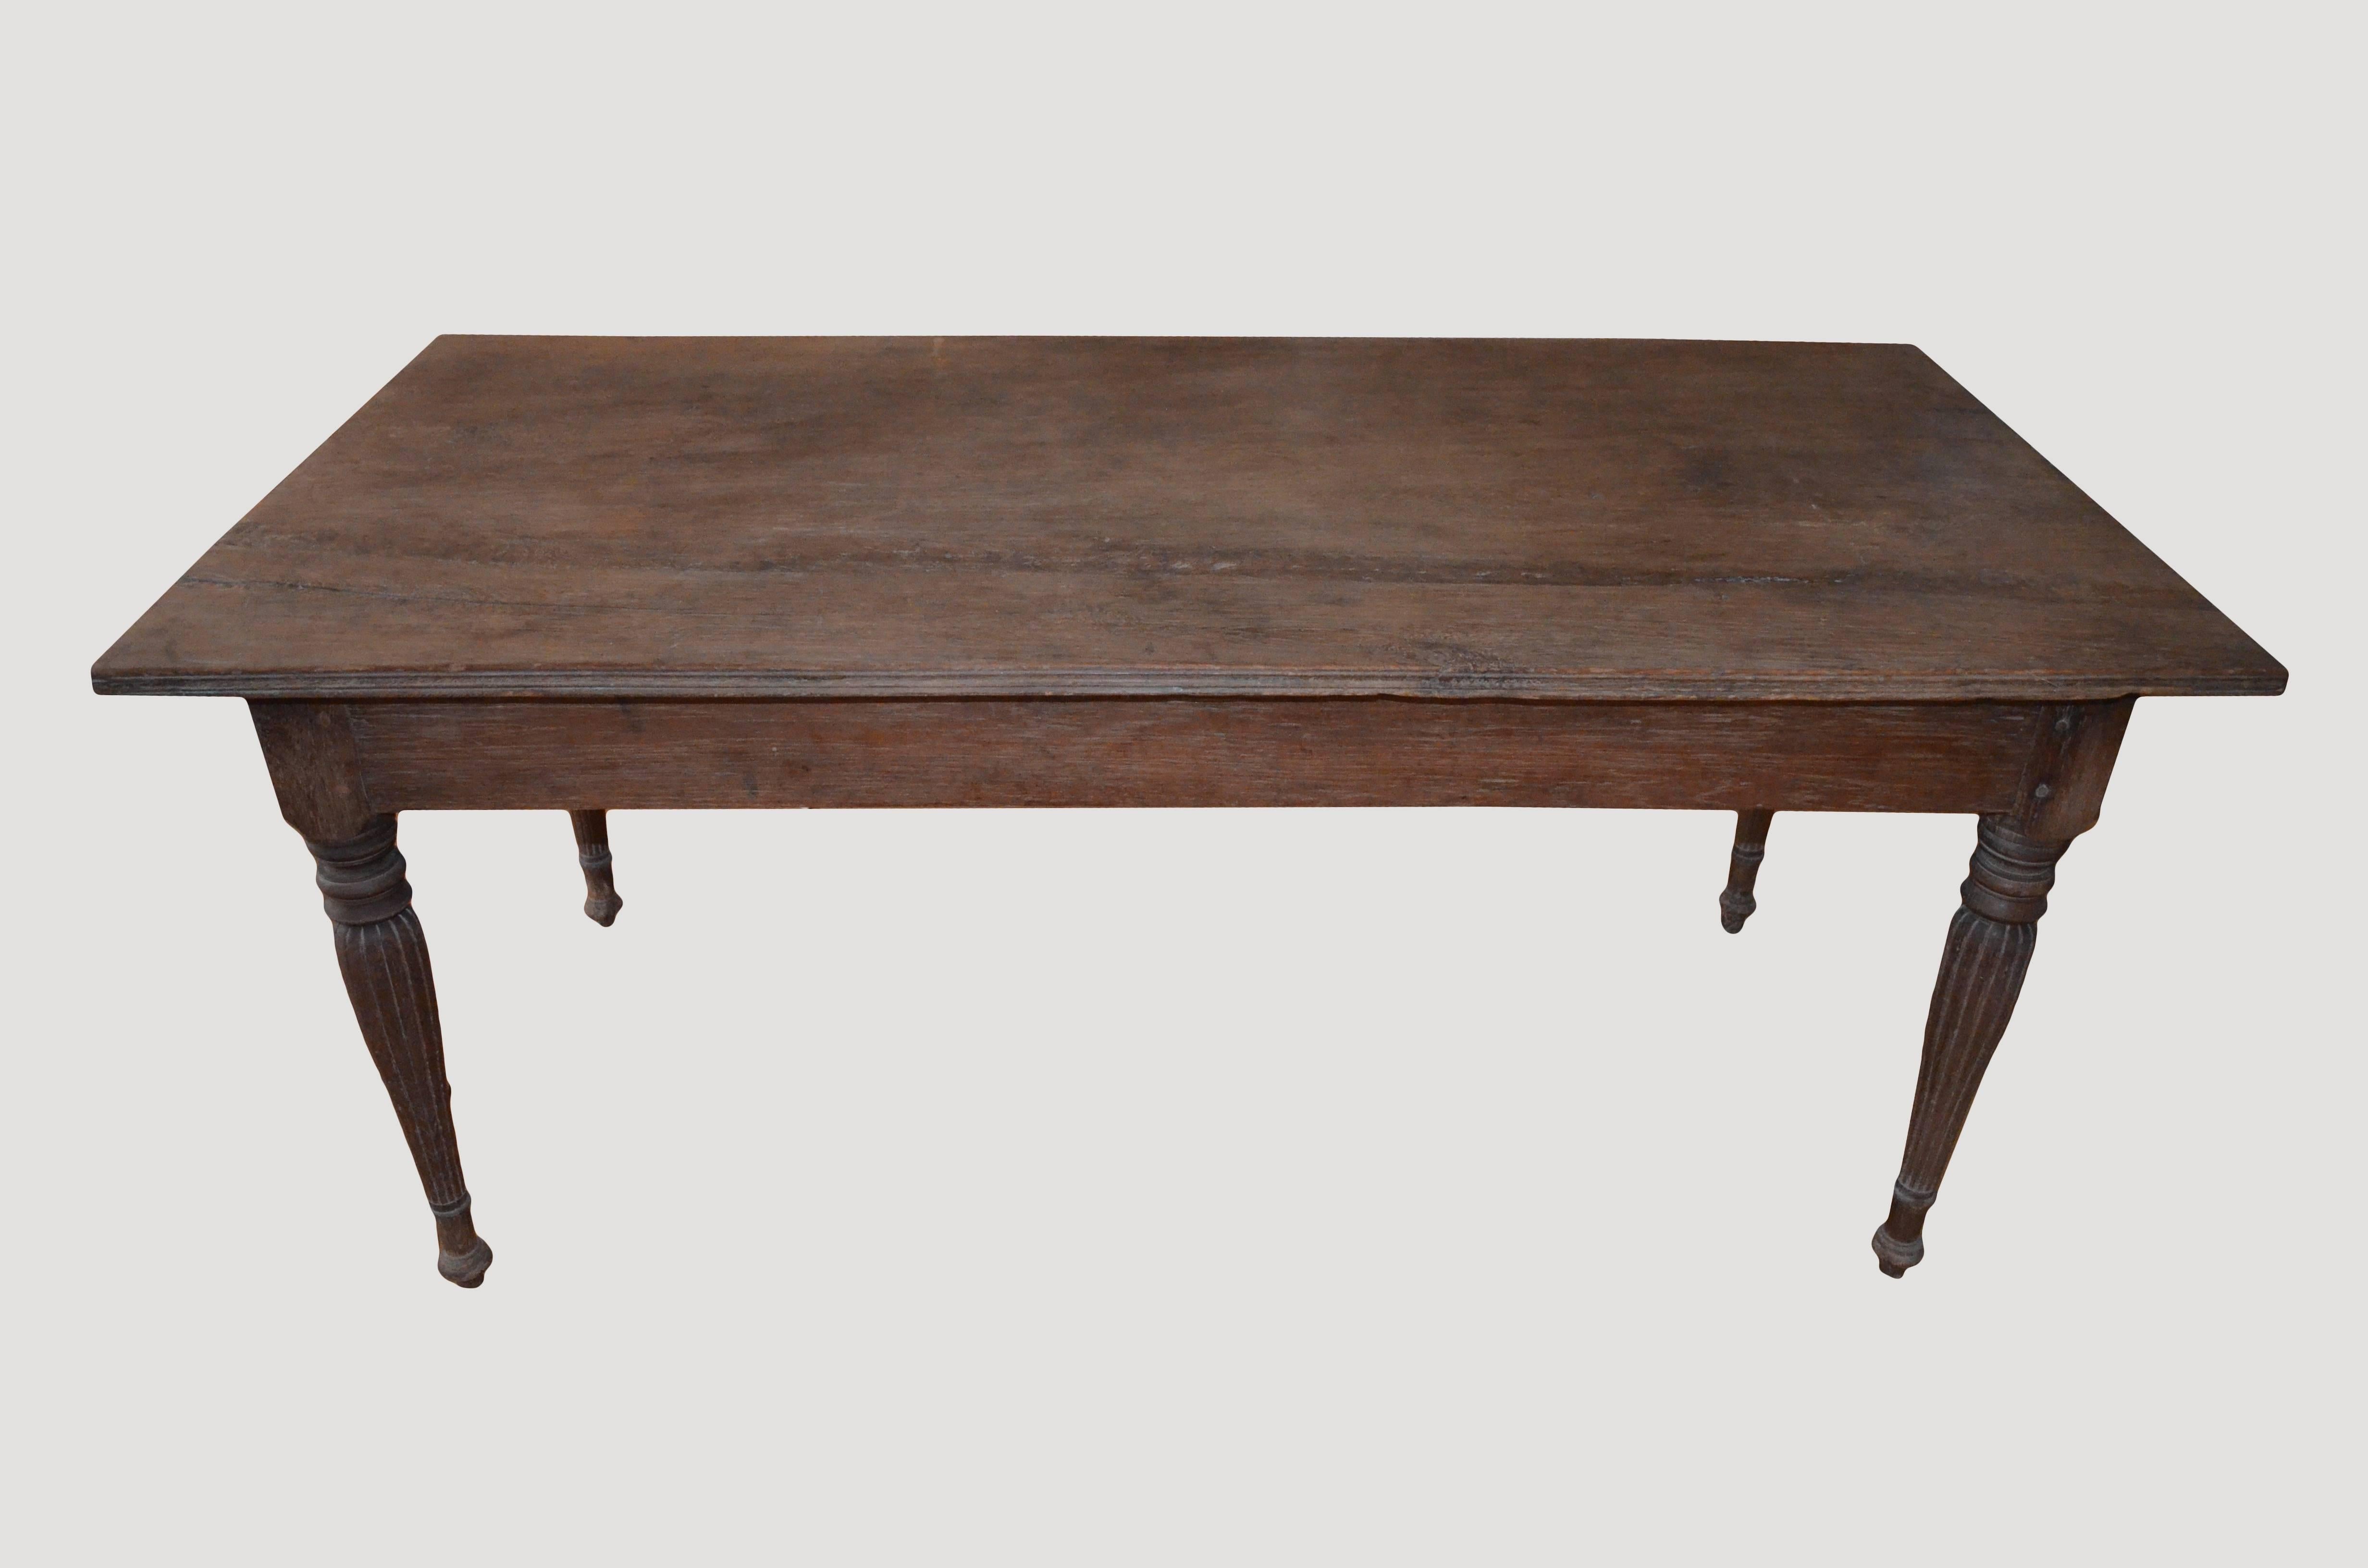 Single slab antique Raffles teak wood desk with a hand-carved bevelled edge. Beautiful hand-carved legs with two drawers. Perfect also as a small dining table or entrance table.

This table was sourced in the spirit of wabi-sabi, a Japanese